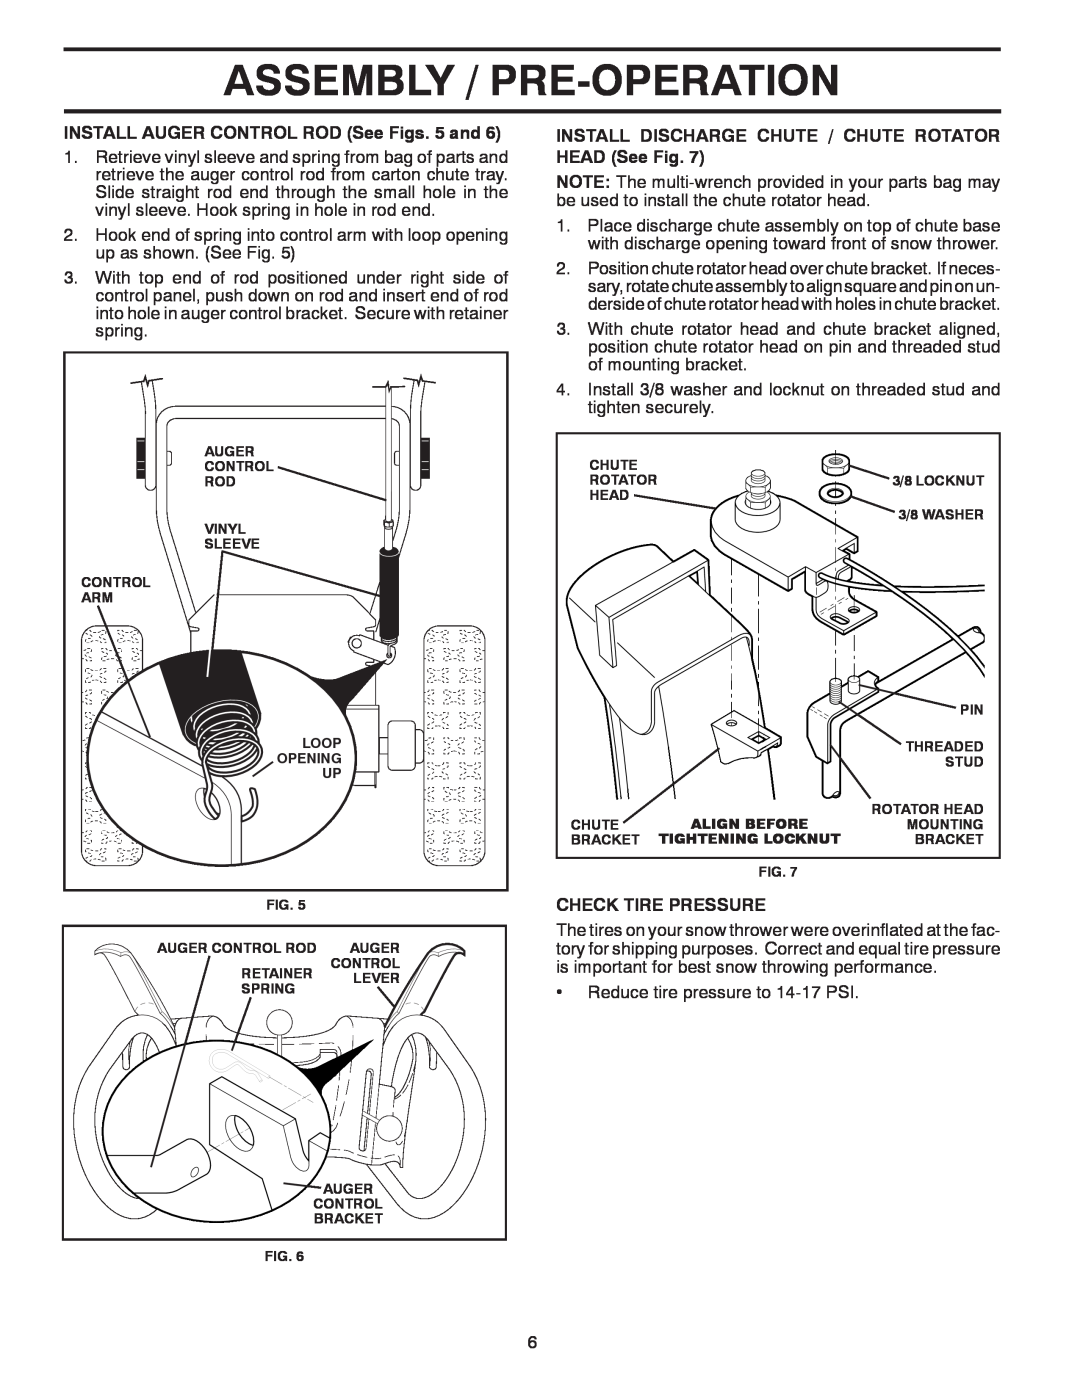 Poulan 428707, 961940008 Assembly / Pre-Operation, INSTALL AUGER CONTROL ROD See Figs. 5 and, Check Tire Pressure 